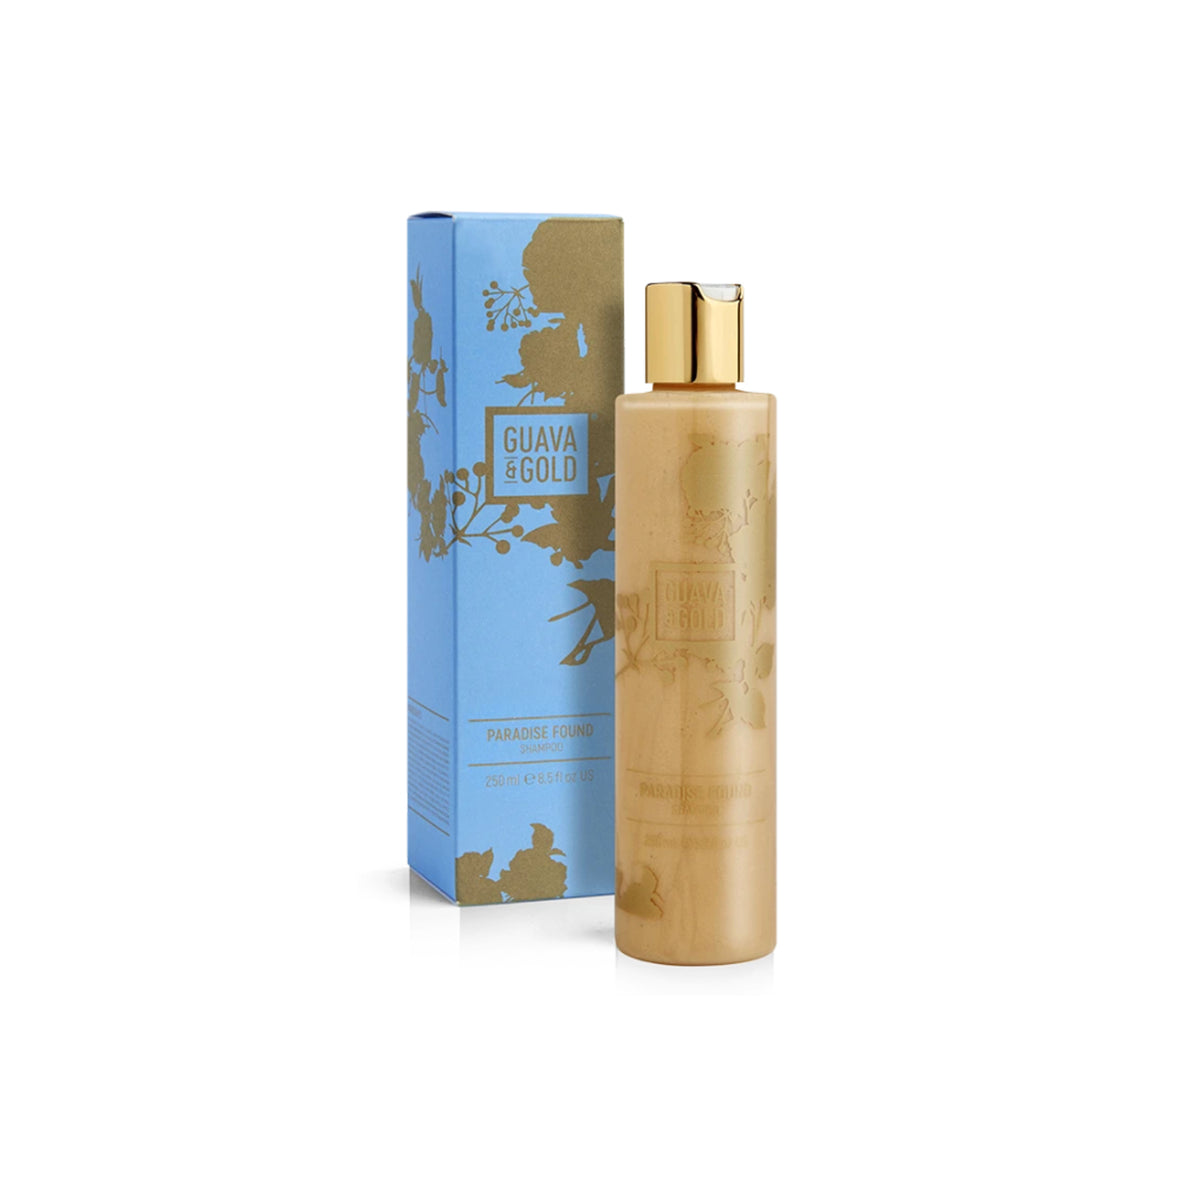 blue and gold printed bottle and box of shampoo by Guava and Gold